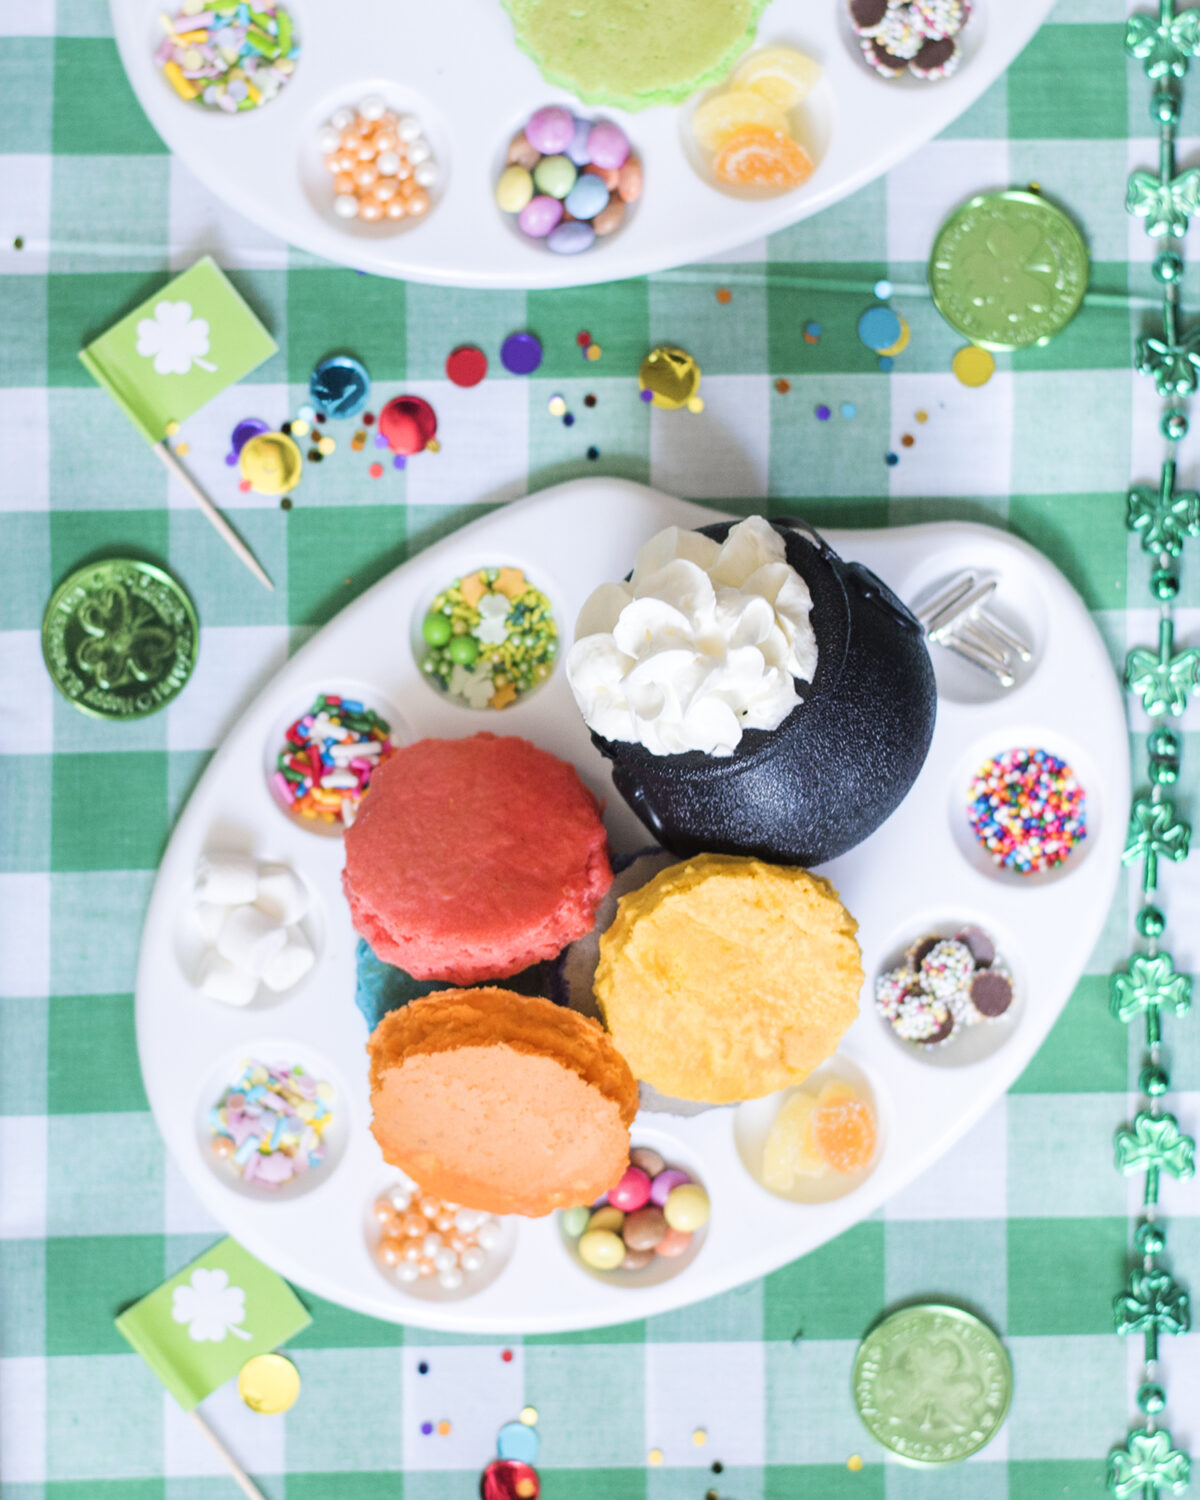 Decorate your own pancakes party - rainbow sprinkles on an artist's palette, shamrock flags and Leprechaun green golden coins